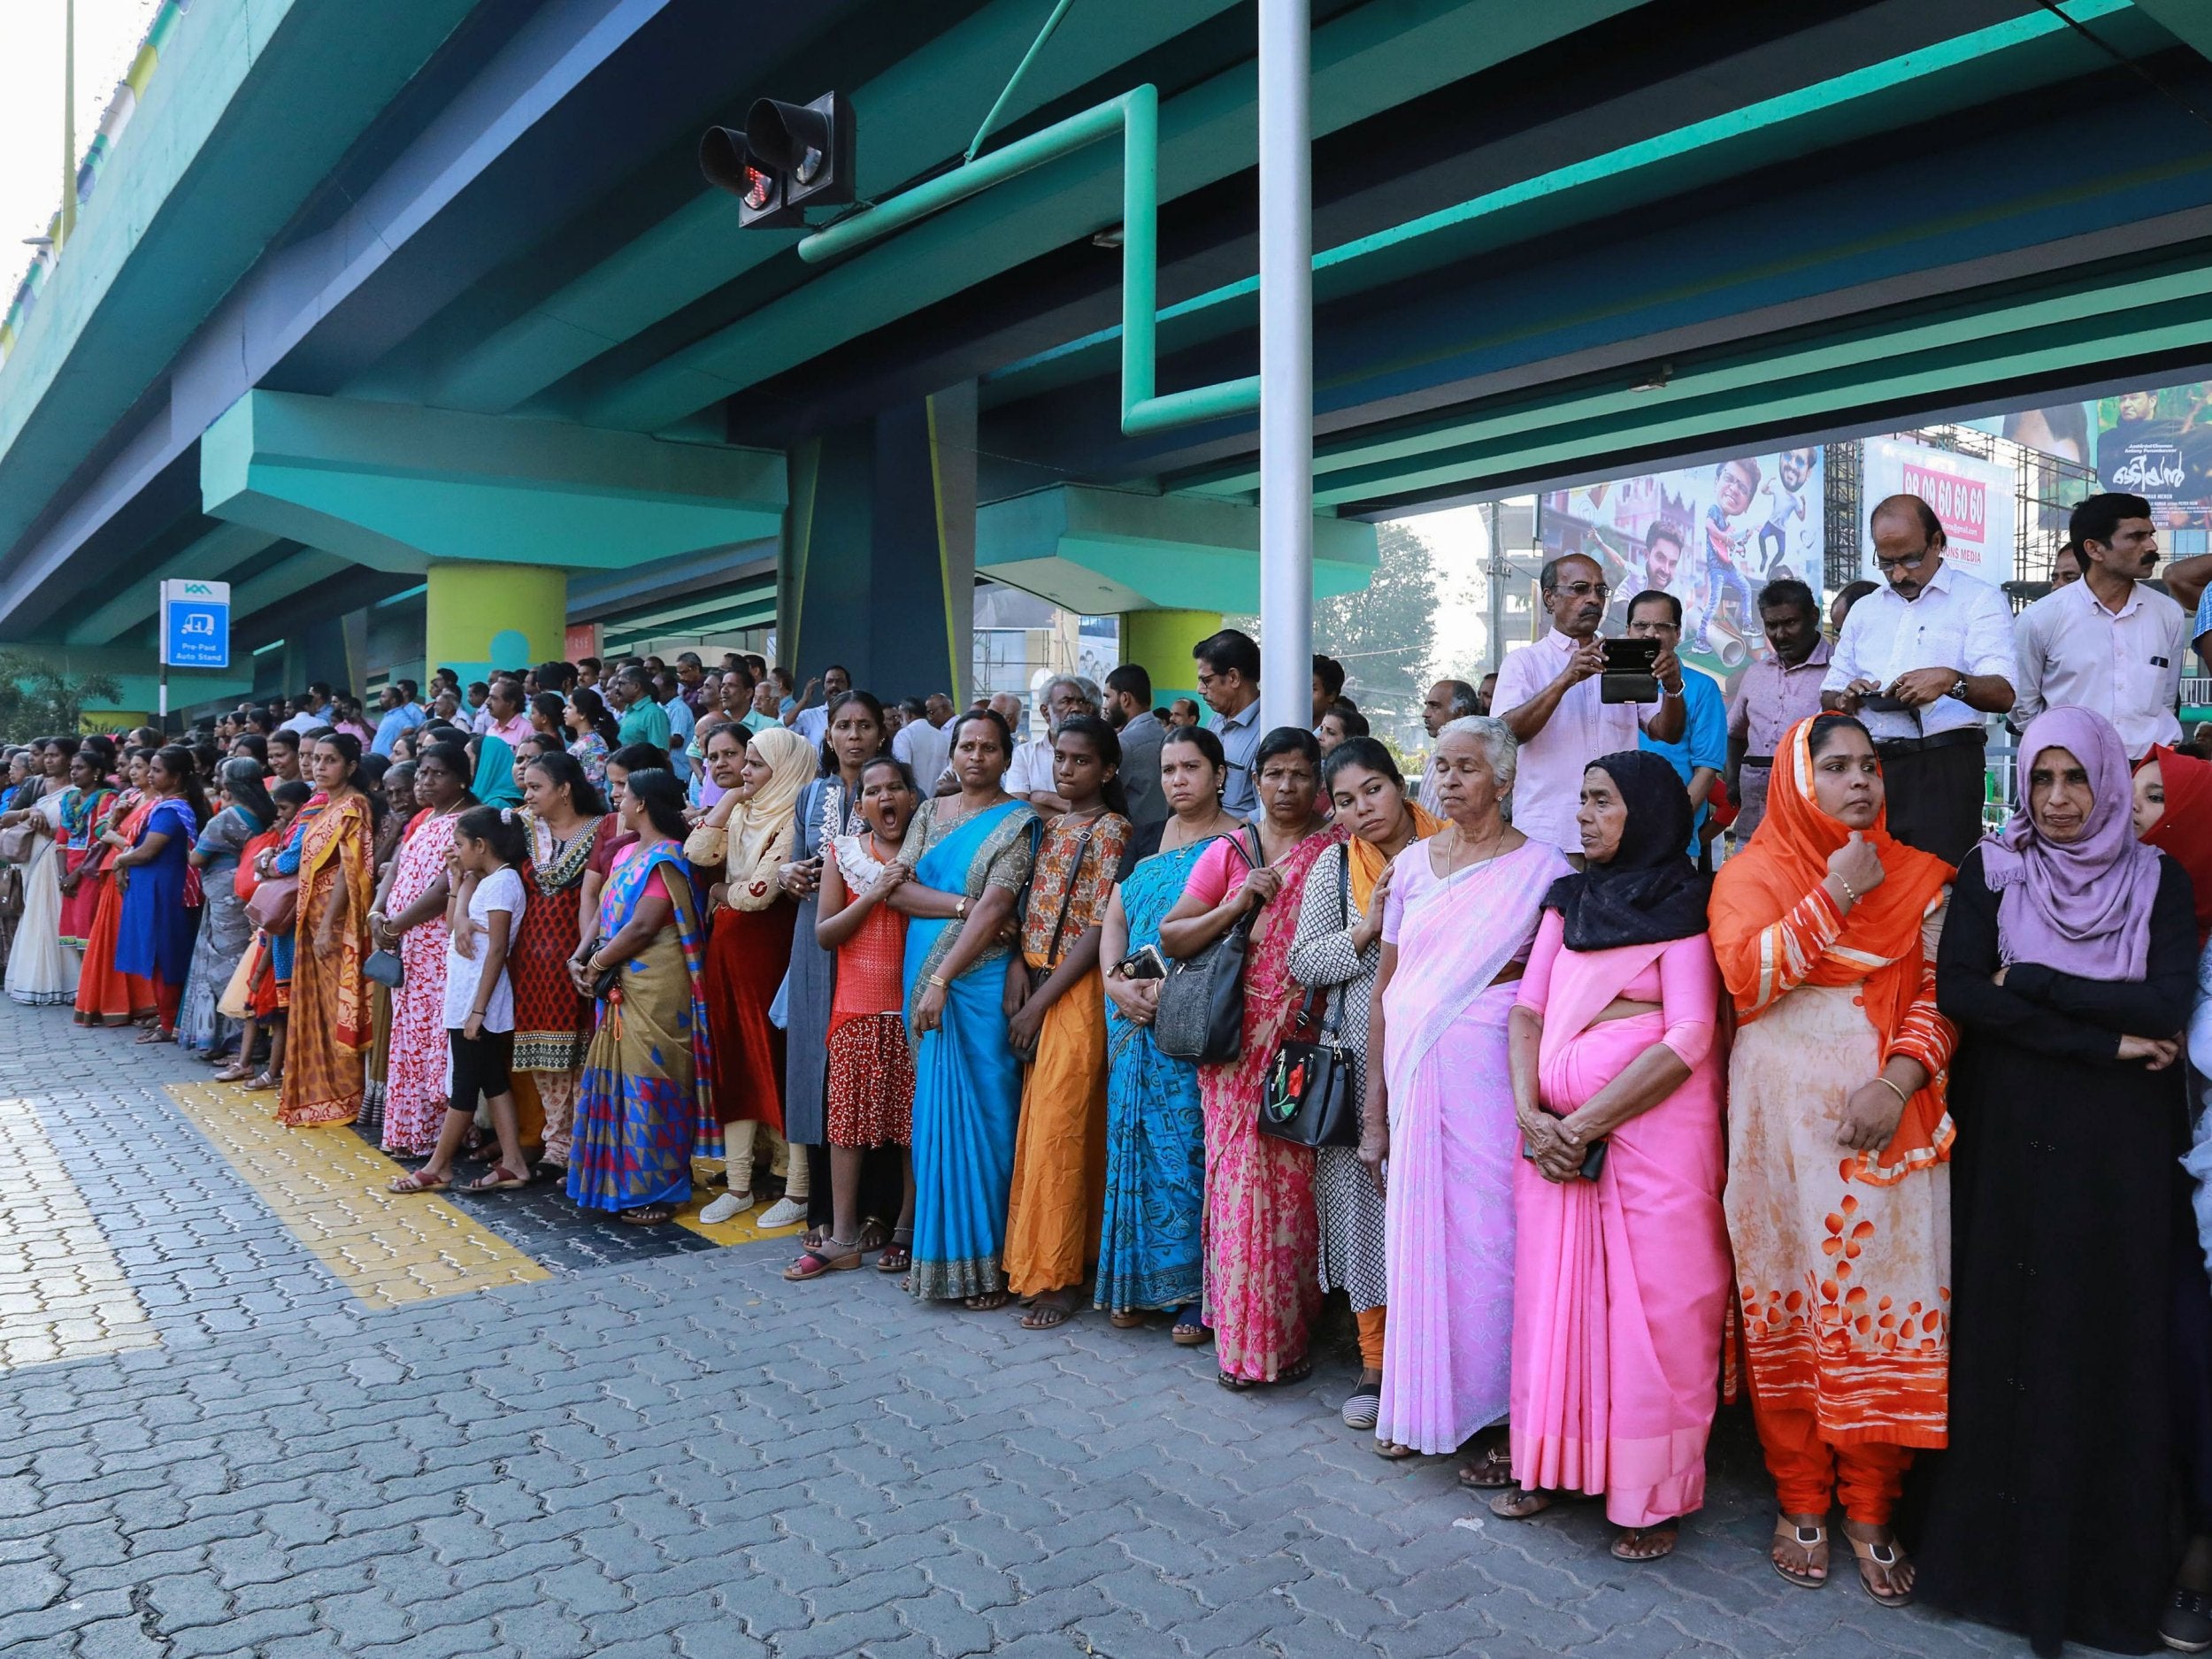 Indian women stand in a line to take part in the ‘women’s wall’ protest in Kochi in southern Kerala state